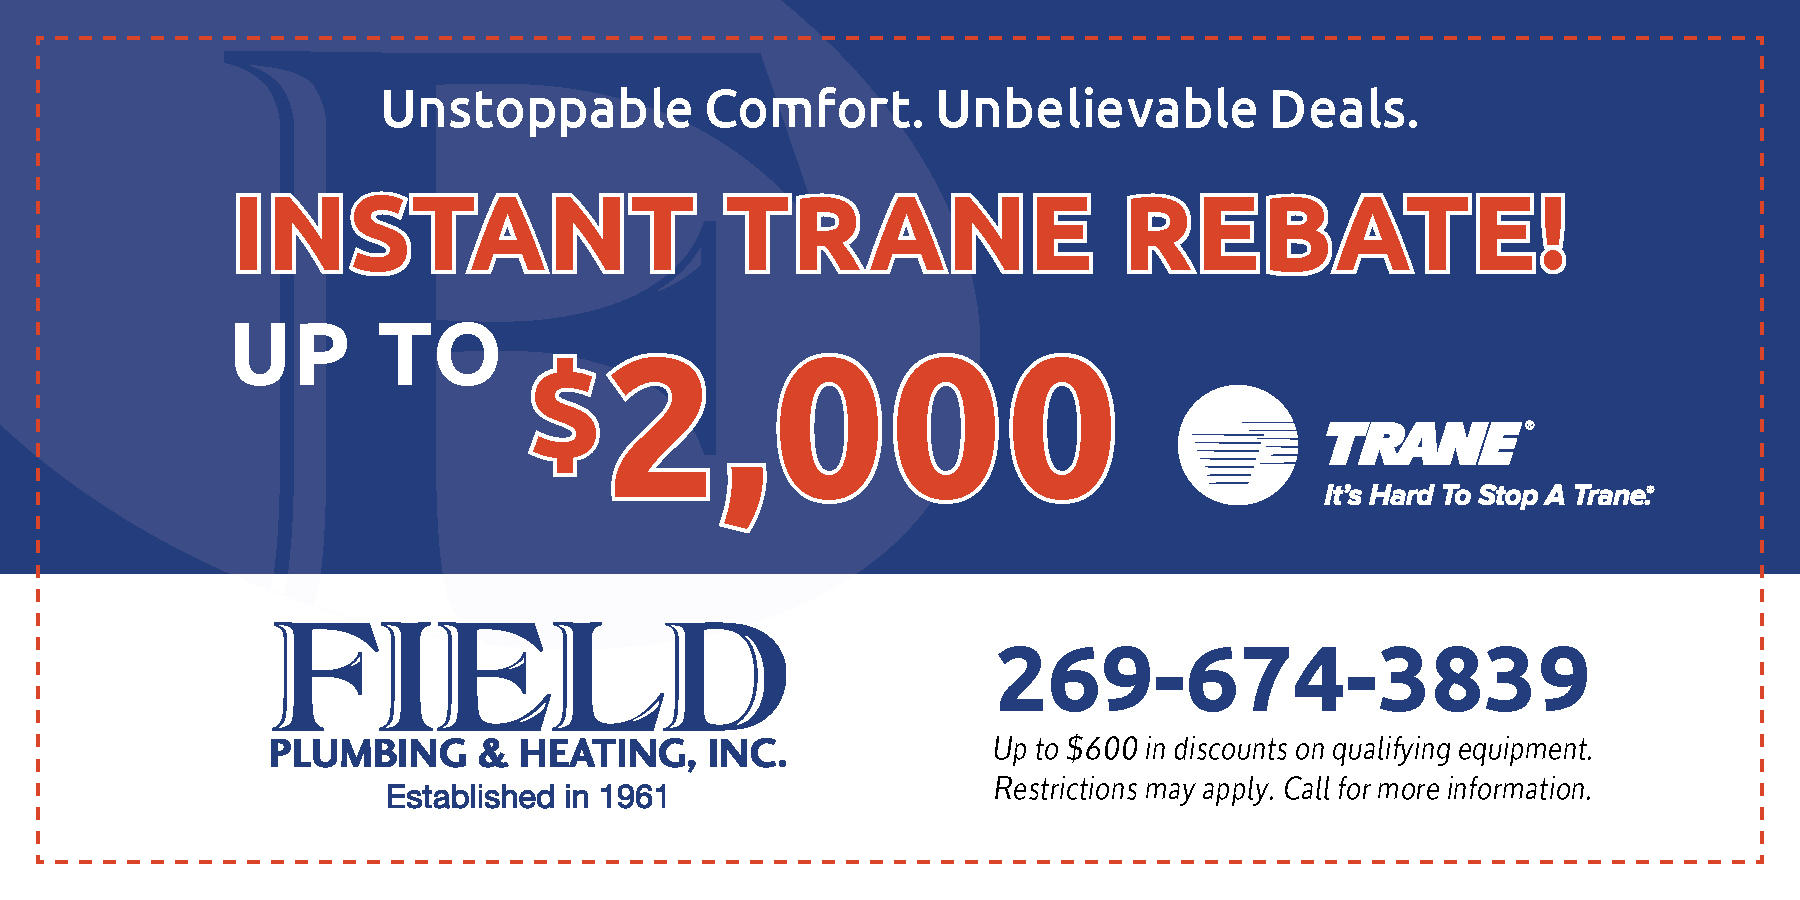 Instant Trane rebate up to $2000!